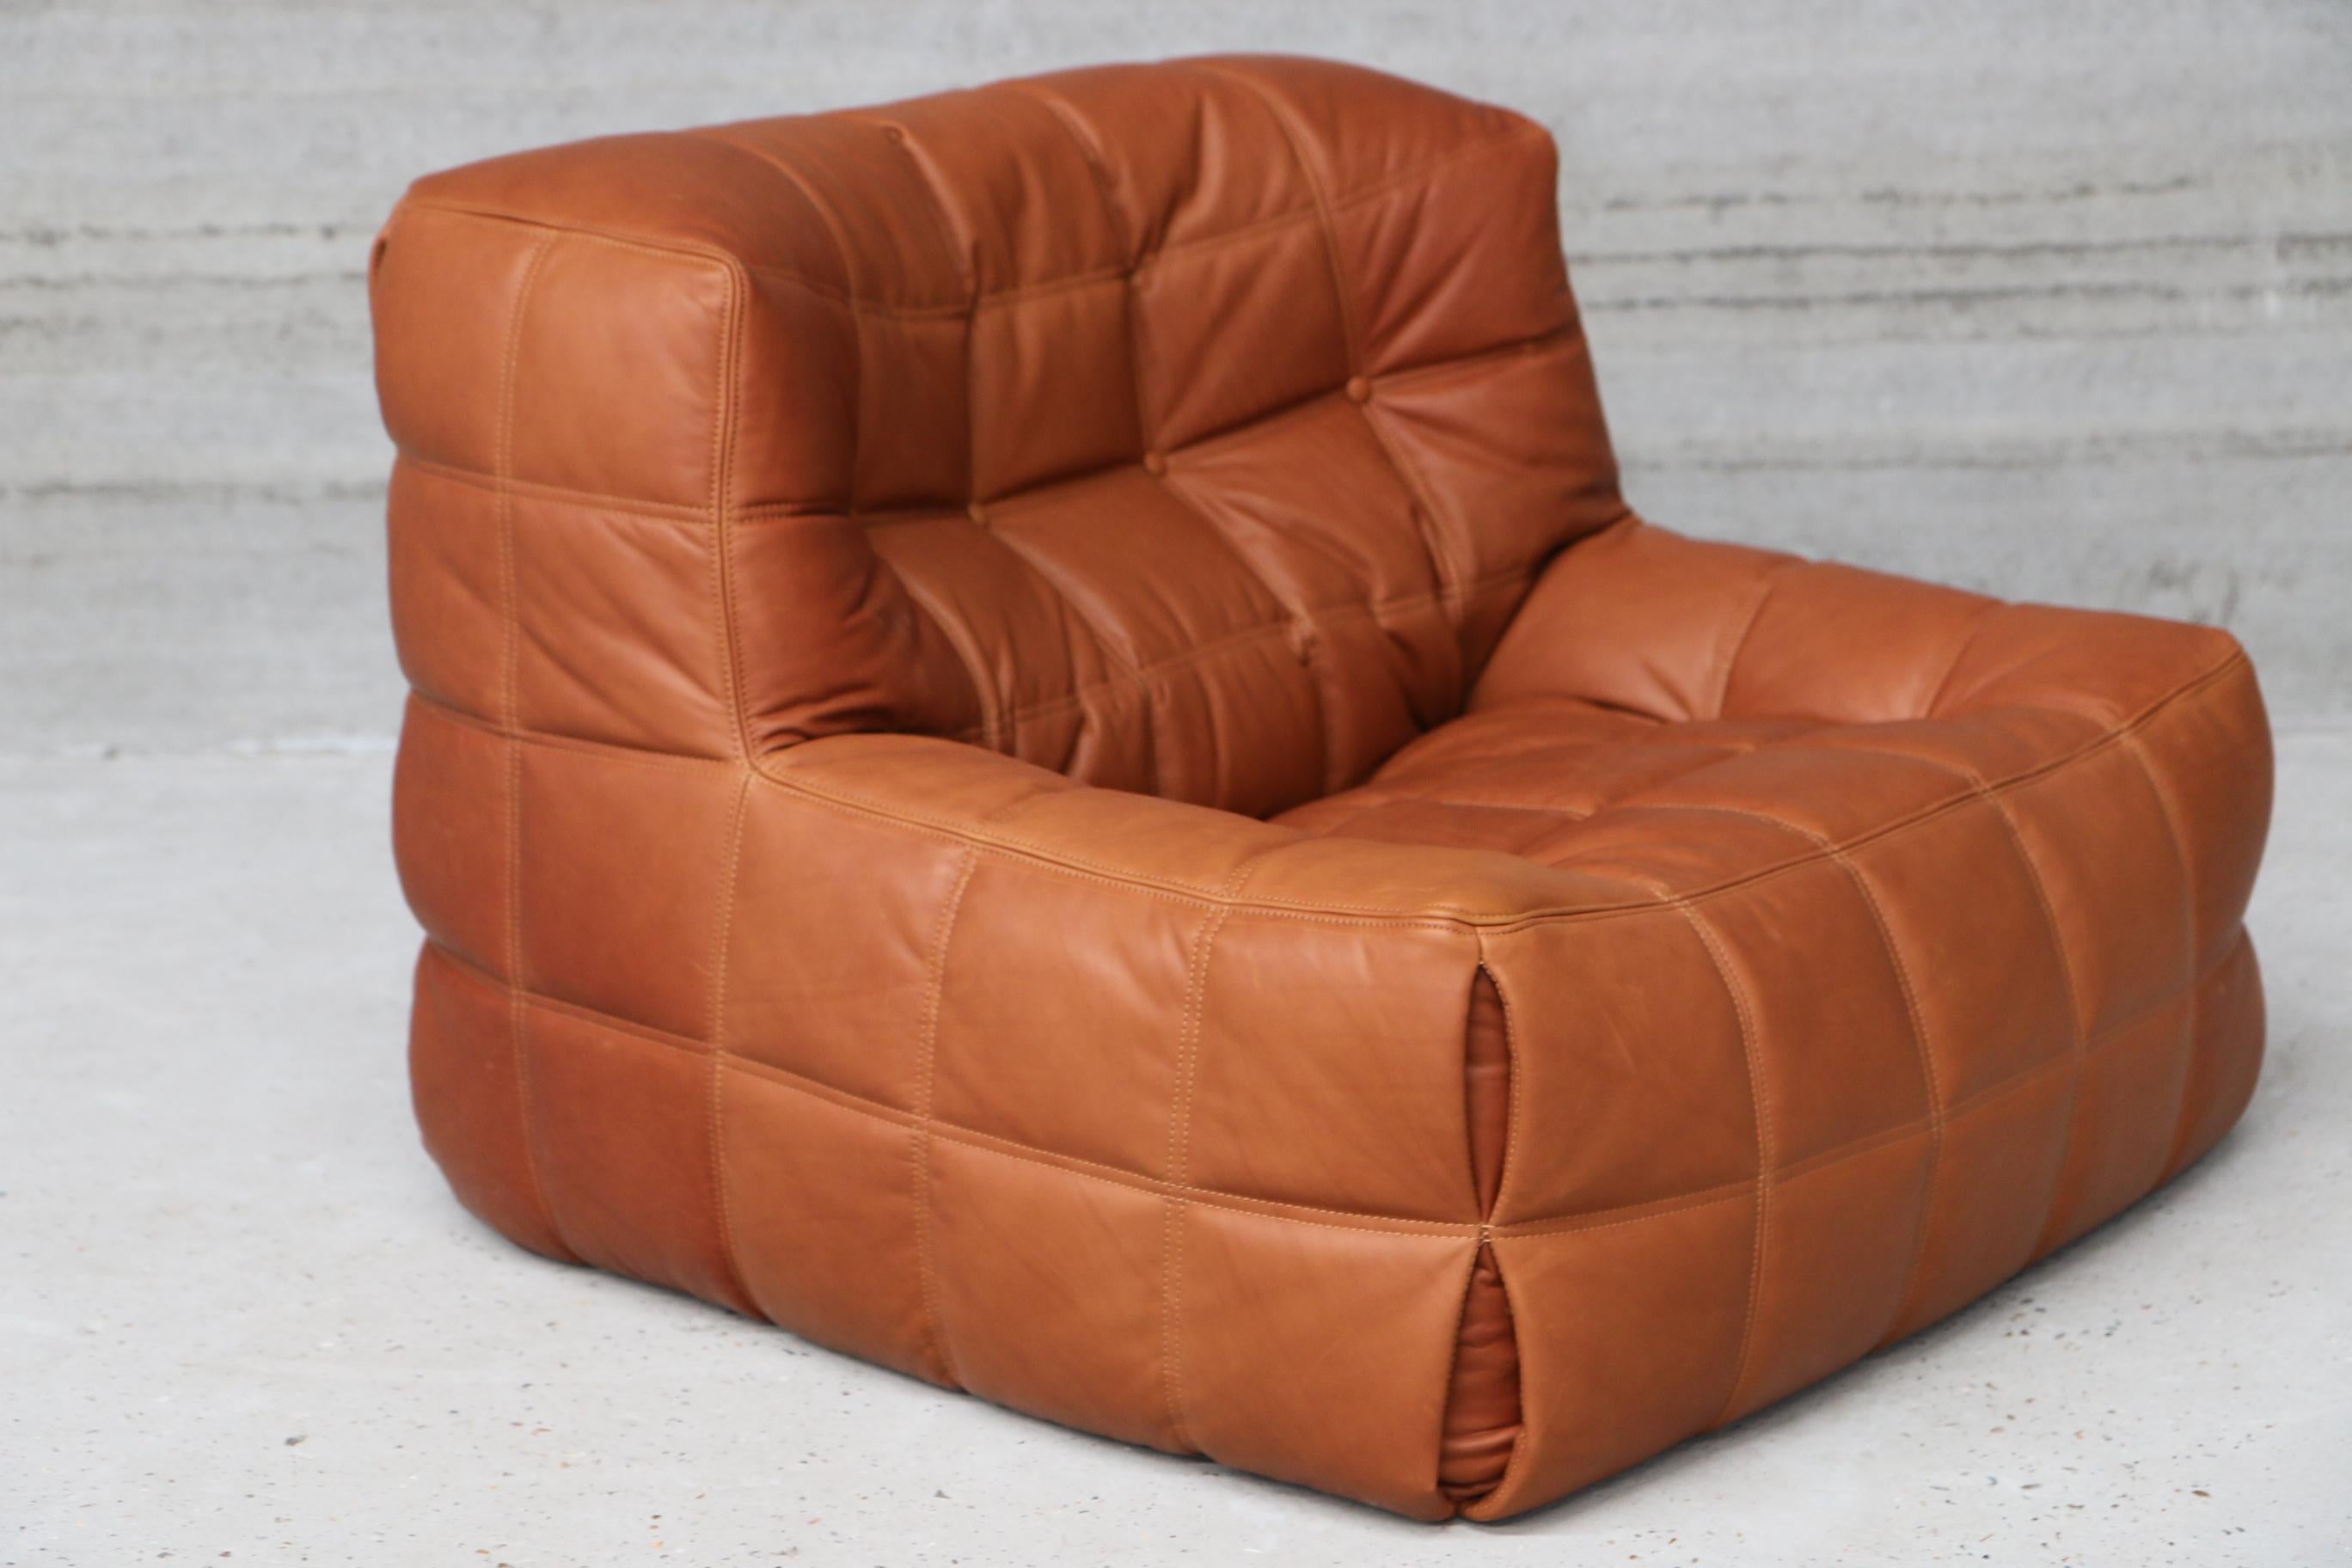 Design by Michel Ducaroy 1973 Re-upholstered in our cognac full grain leather.
 